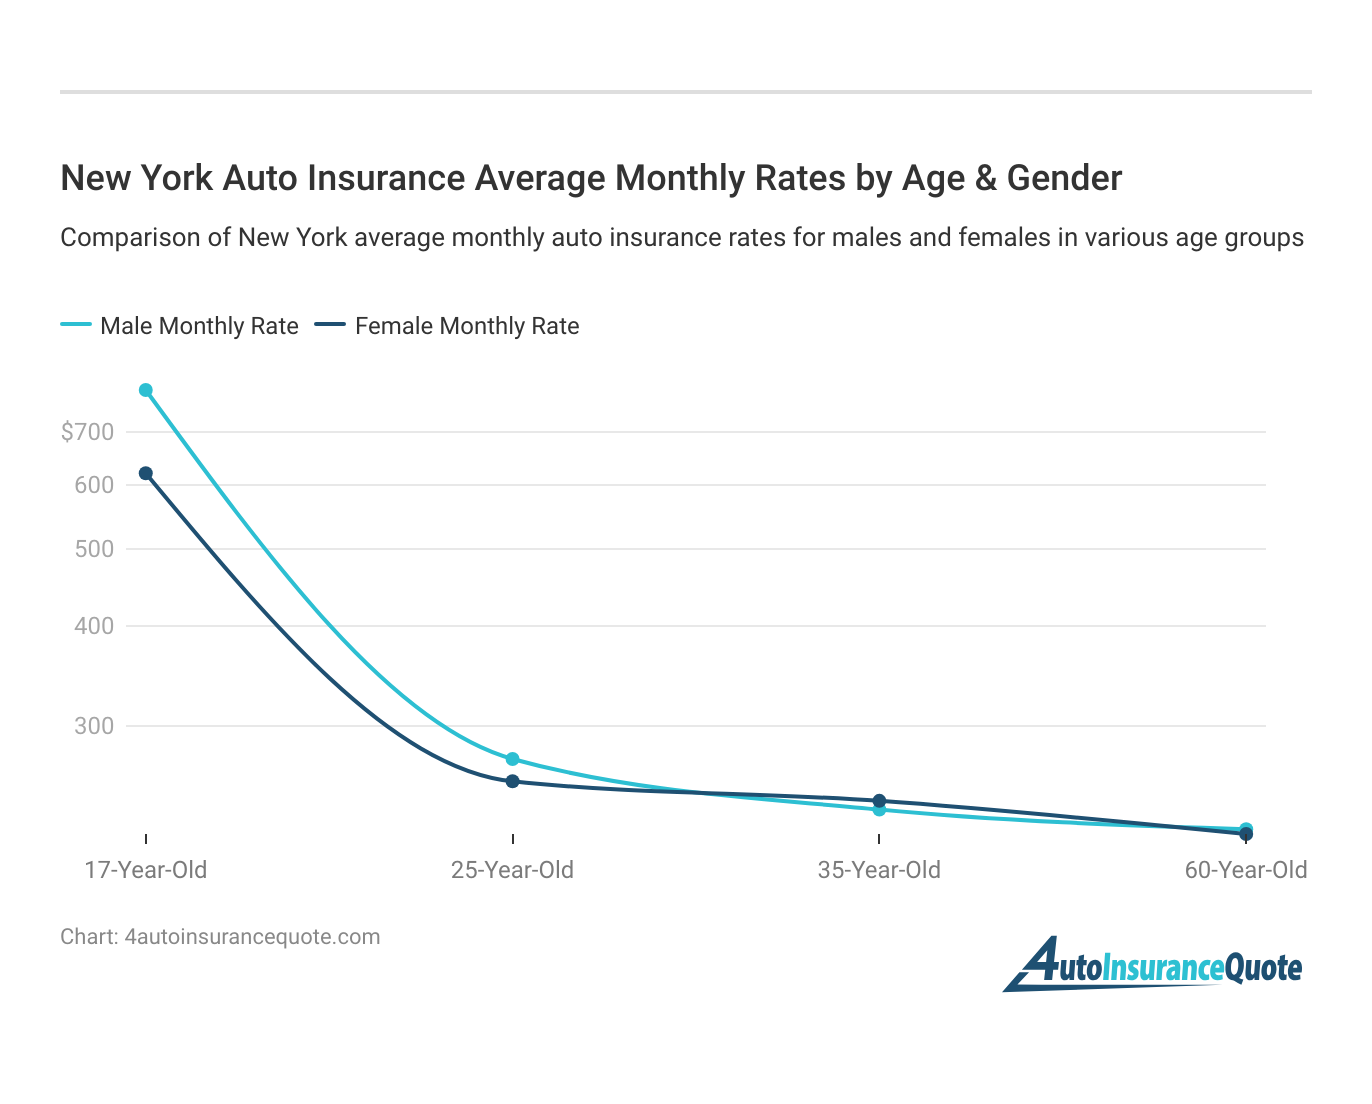 <h3>New York Auto Insurance Average Monthly Rates by Age & Gender</h3>